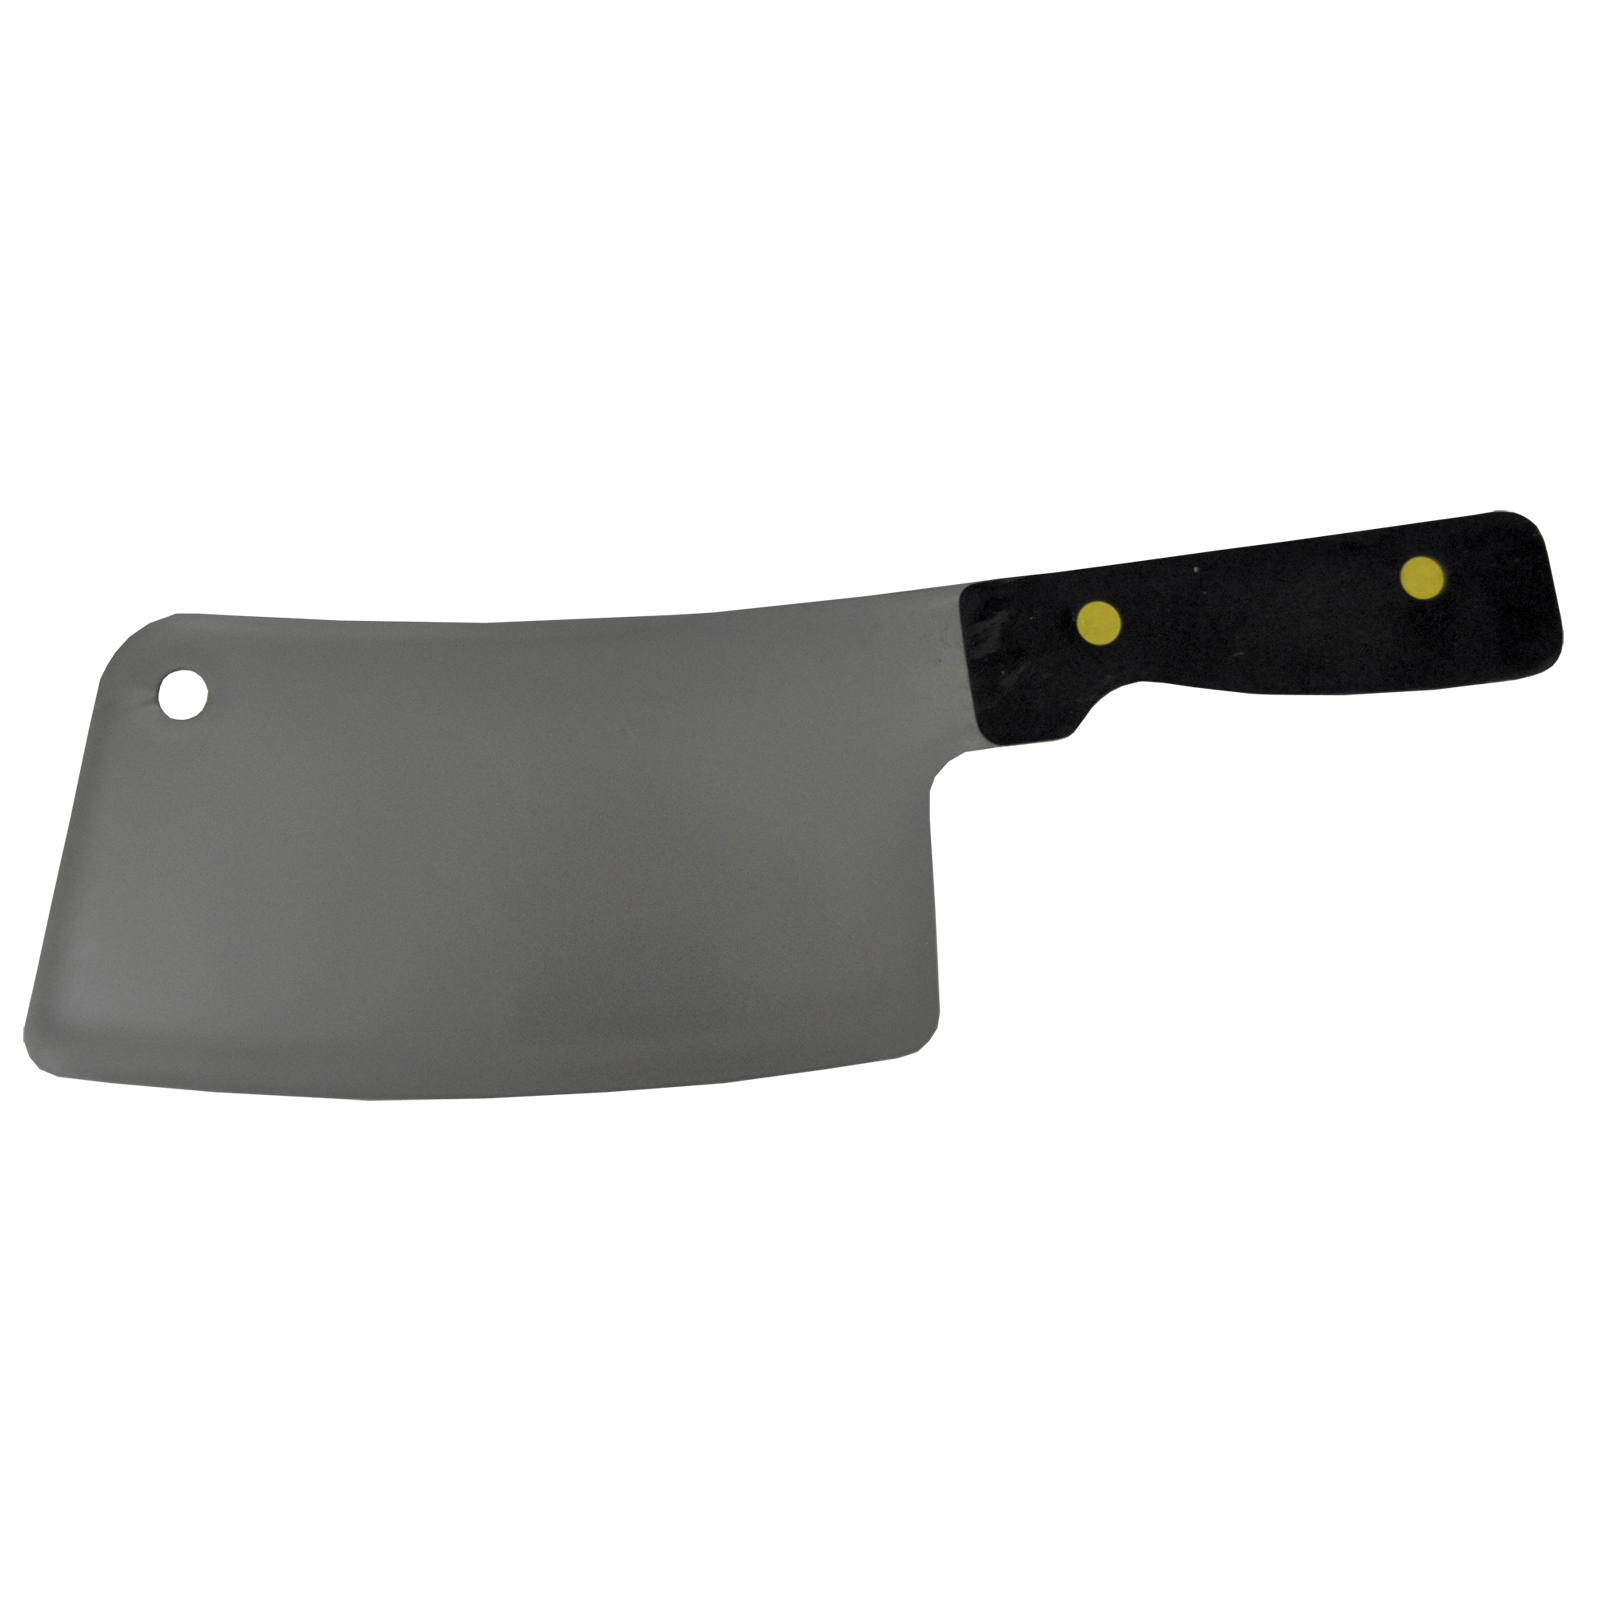 Meat Cleaver Costume Accessory